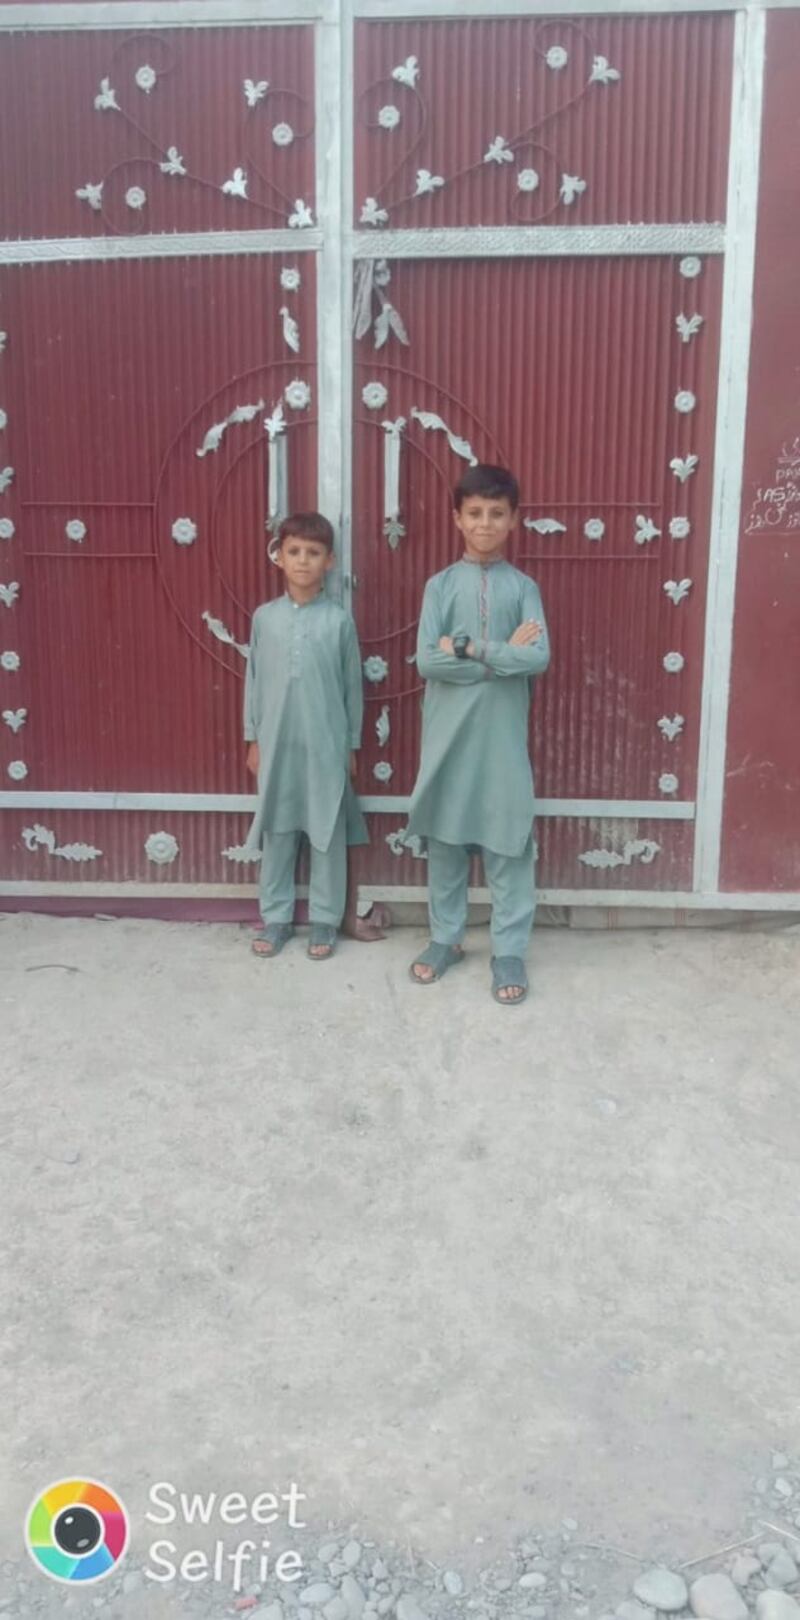 Mukhsin, 7, Mamoor Khan's youngest son, stands with his brother Hakimullah, 9, in one of the pictures shared by the terrorist victim's family.